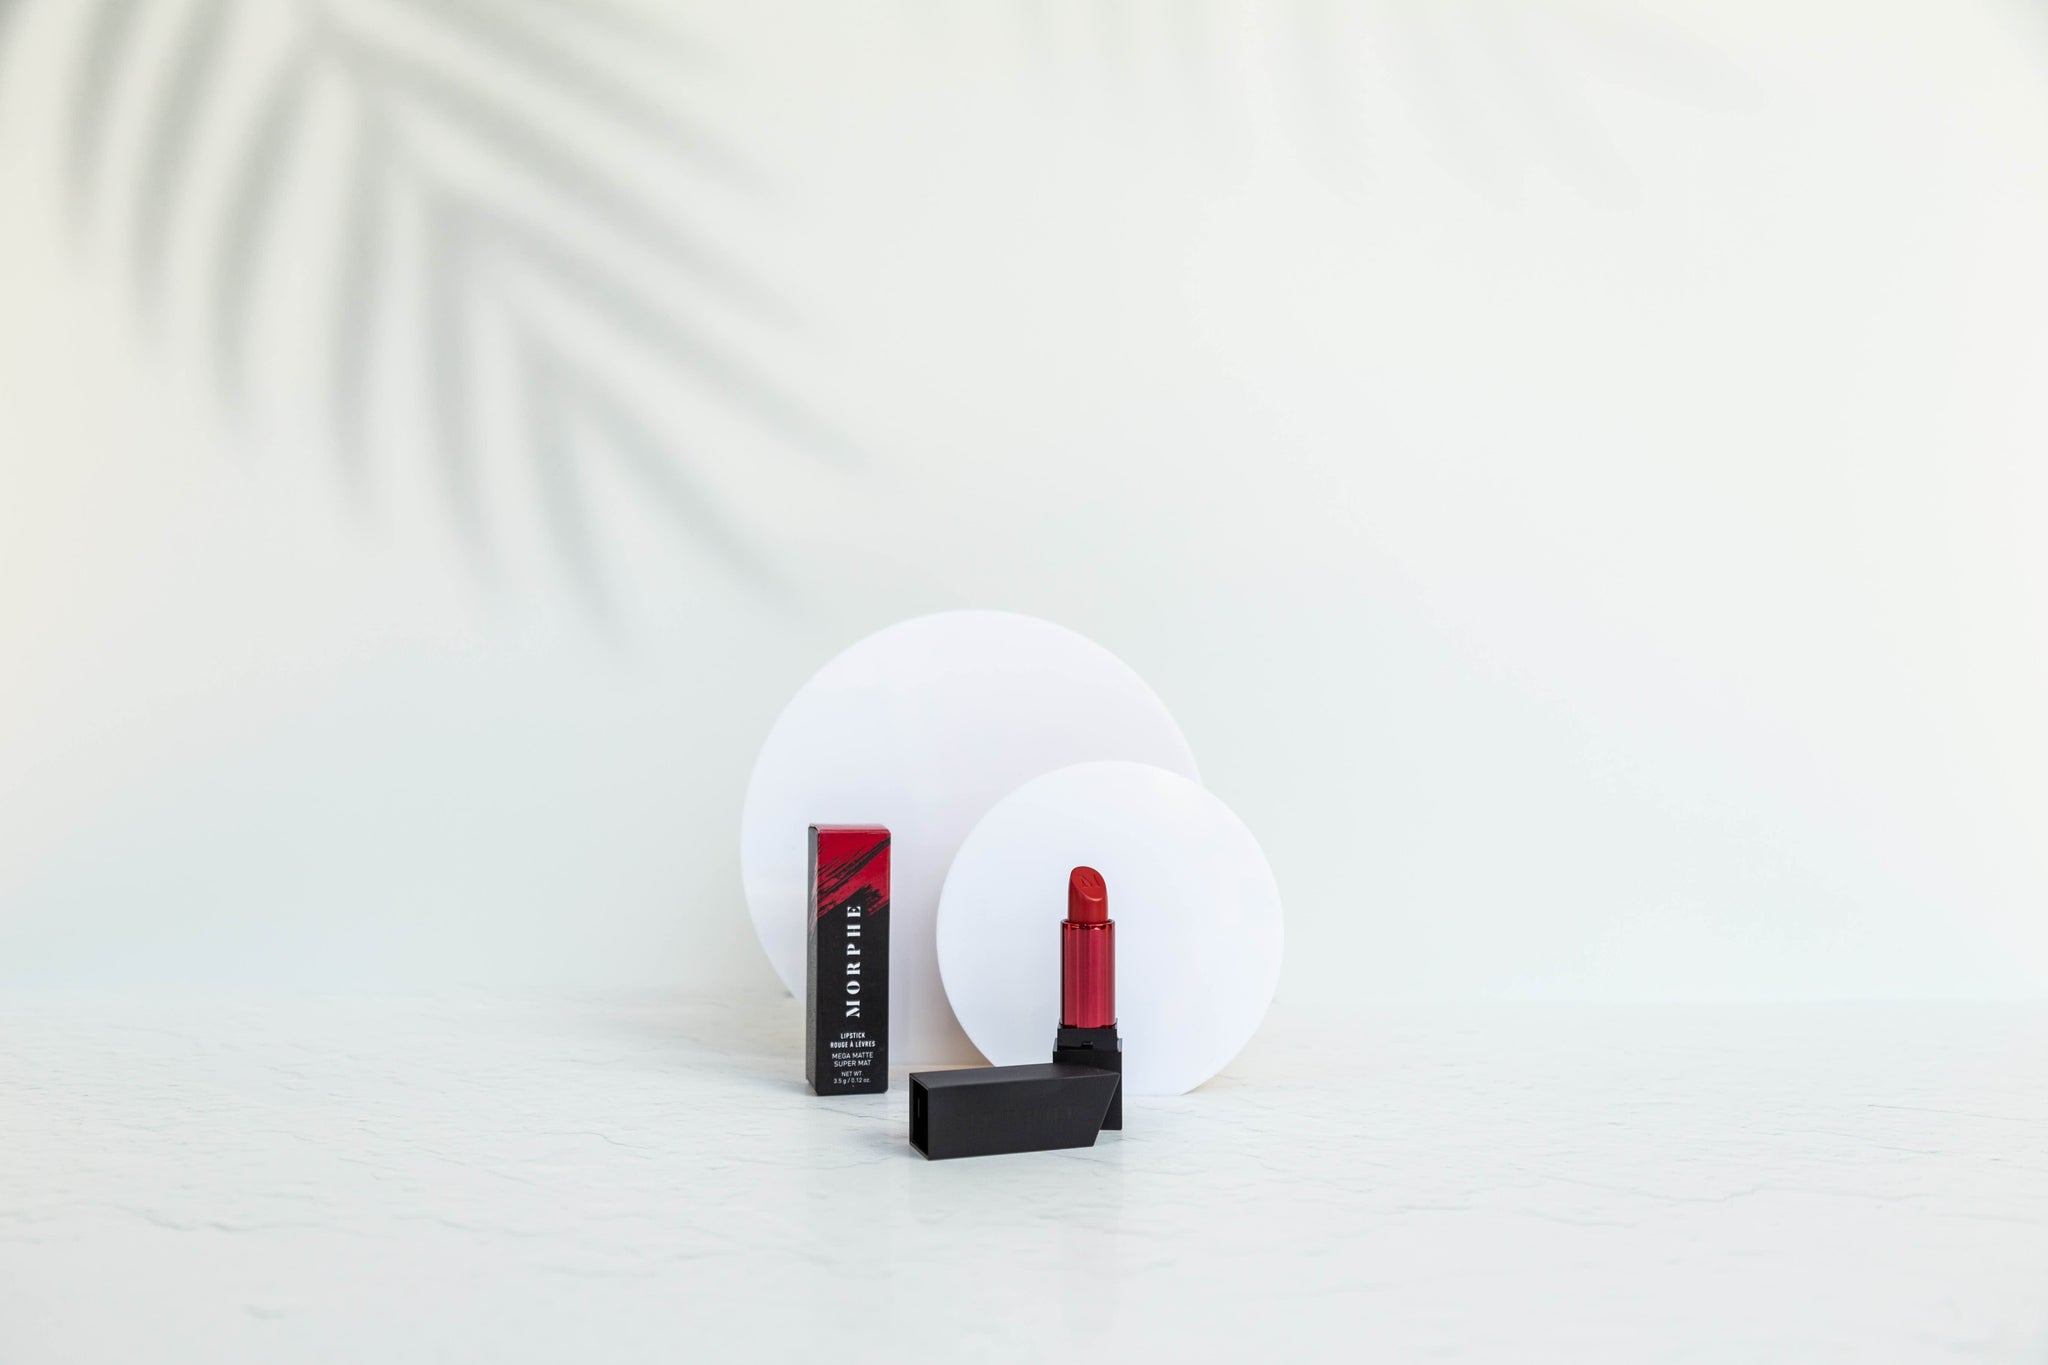 white palm tree leaf shadow photography backdrop and white acrylic circle photography props photographing red morphe lipstick for cosmetic product photography - backdrop collective australia